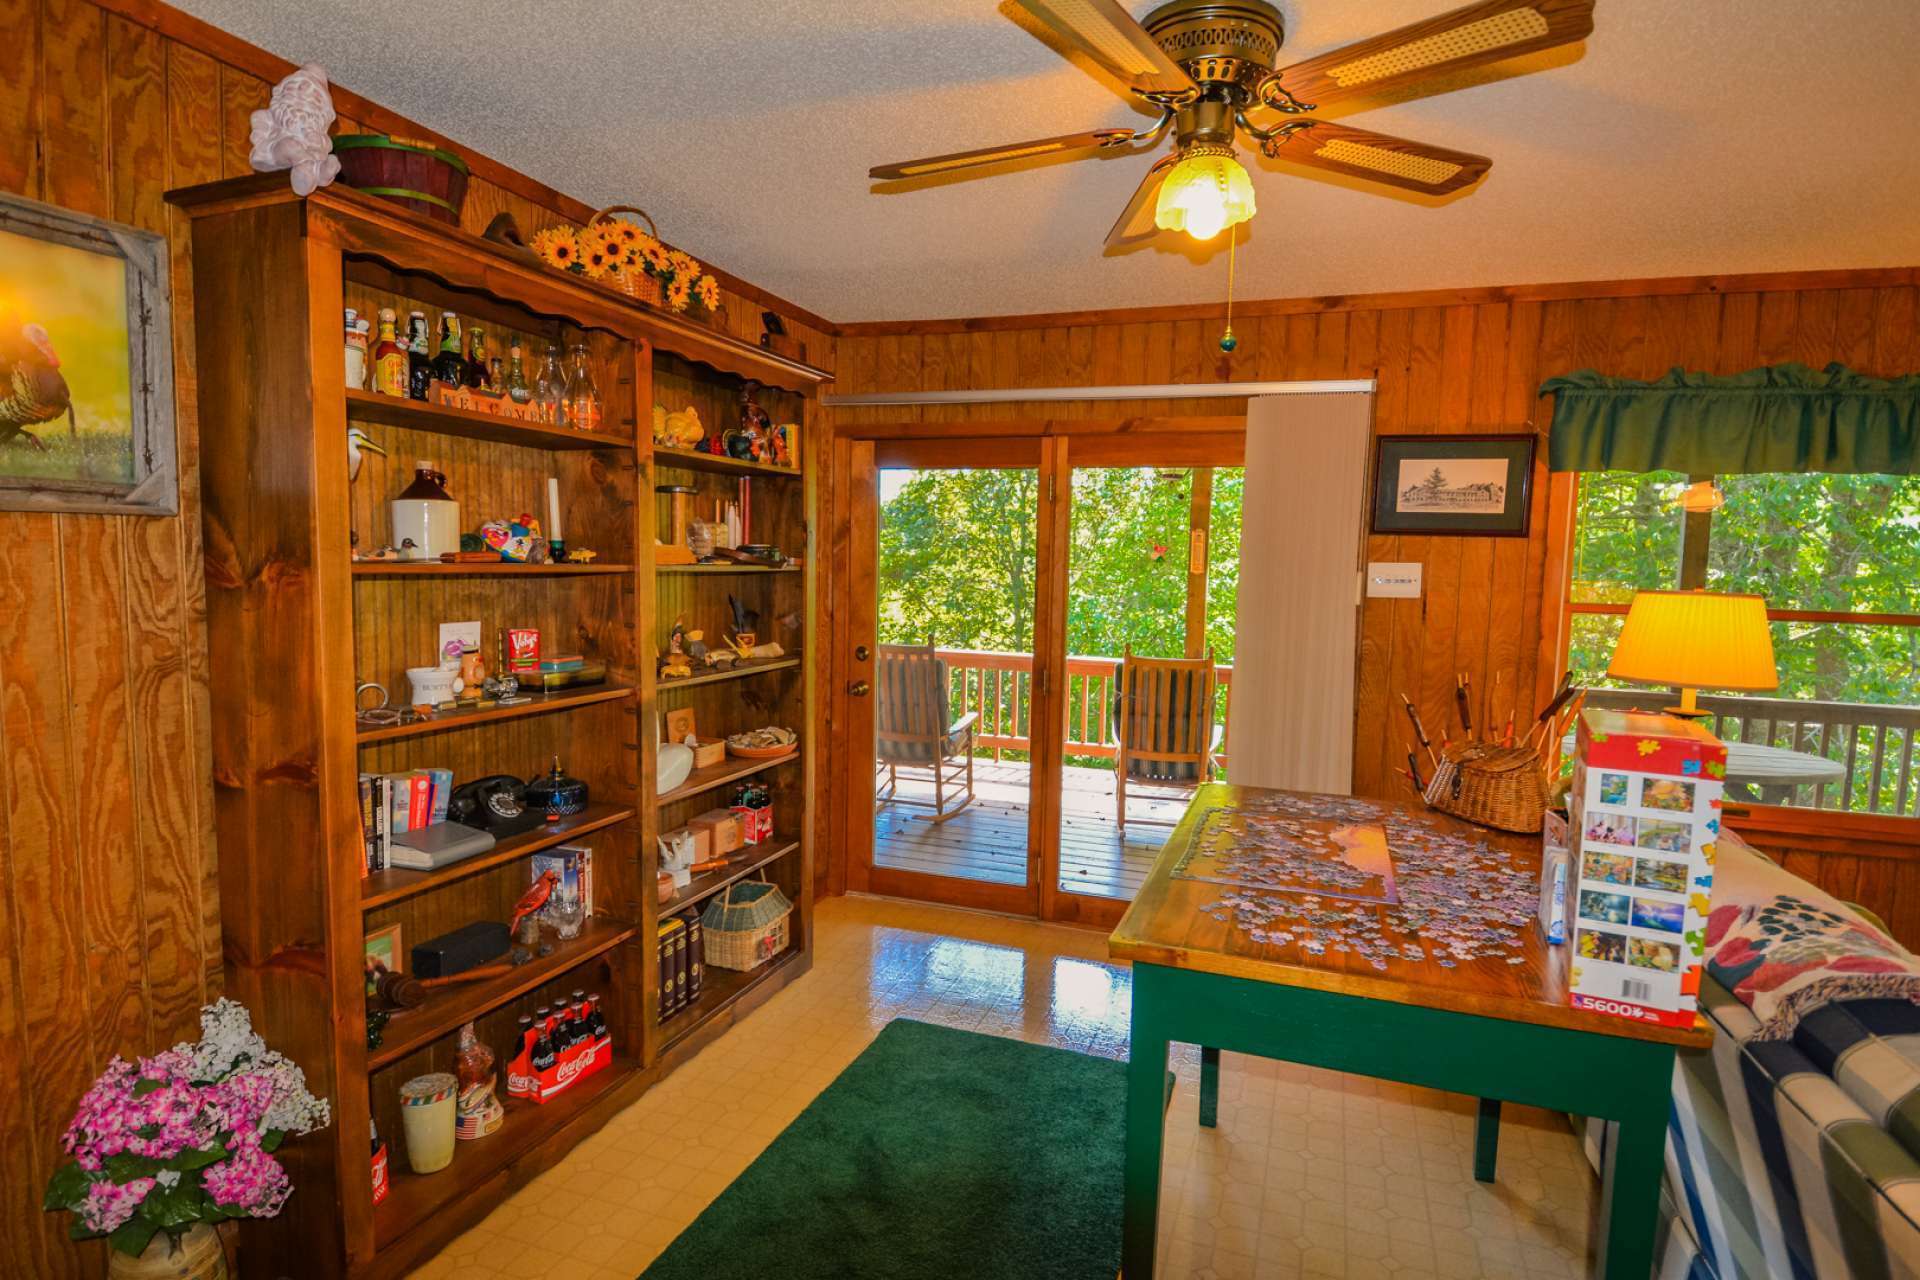 Notice the built-ins for displaying your favorite collectables, books, or family photos. You will also enjoy easy access to the deck for outdoor grilling, dining, and entertaining.